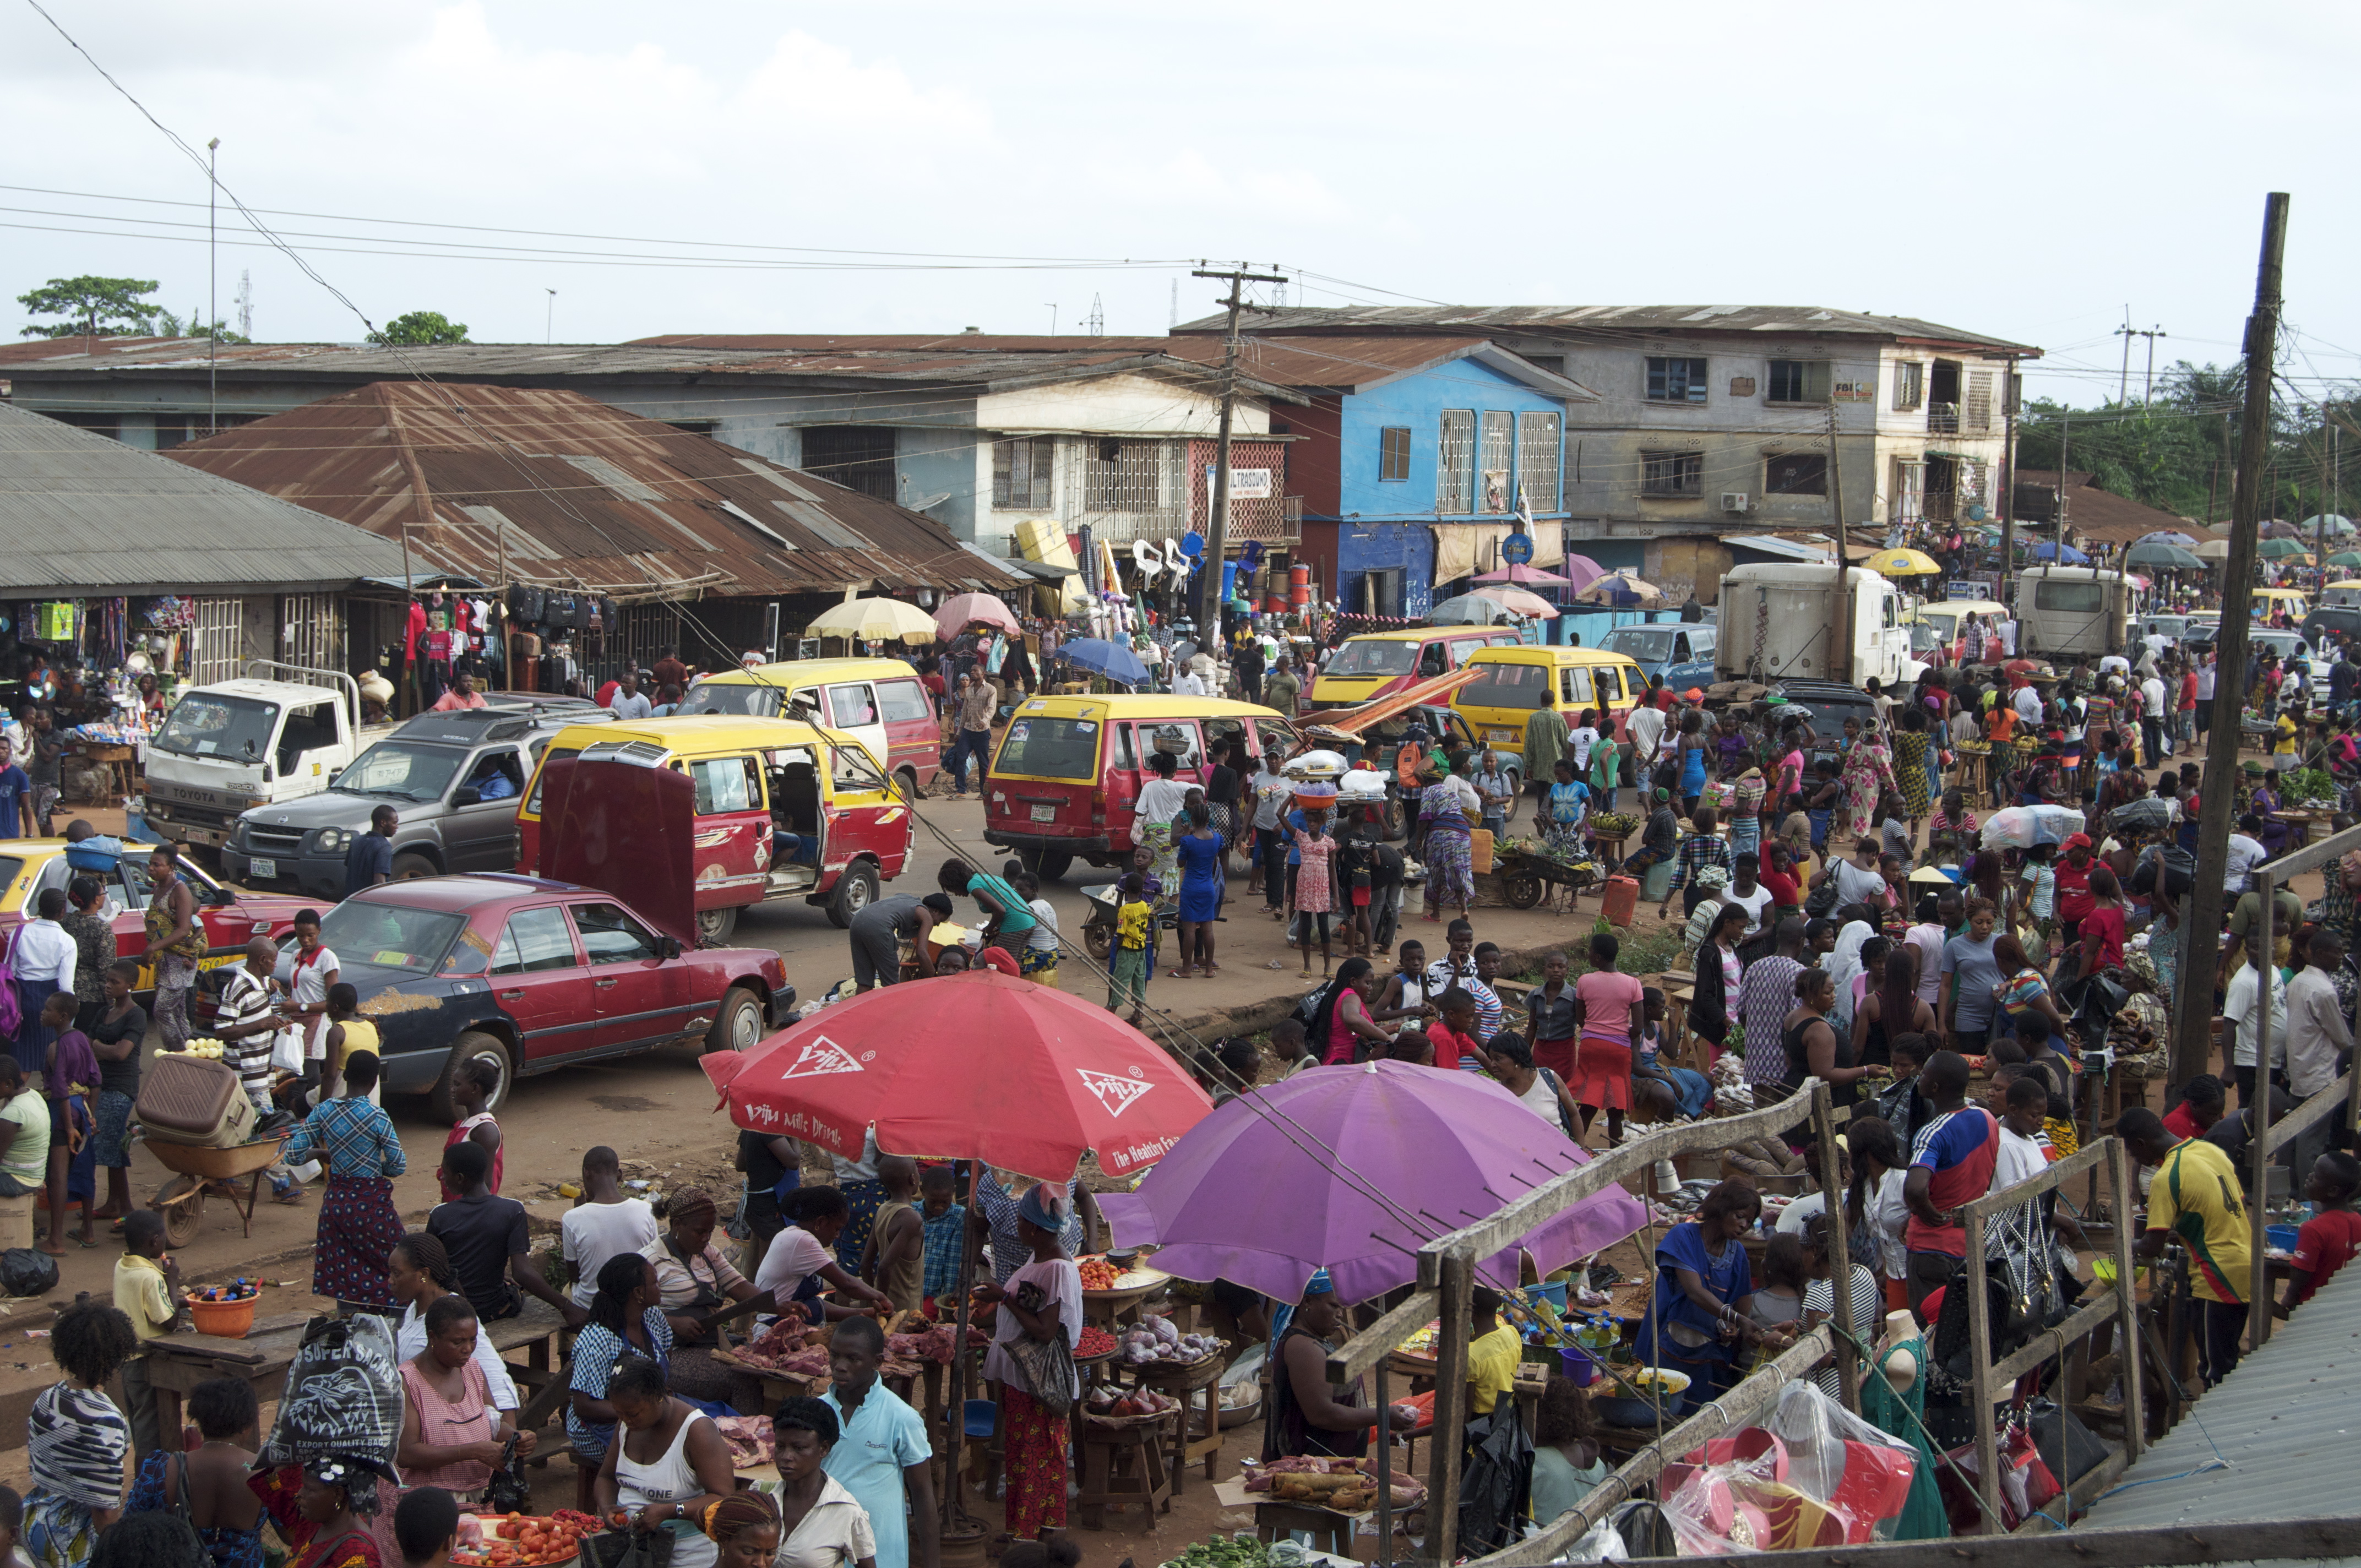 Benin City: Half of Everything Once Whole by Dare Dan